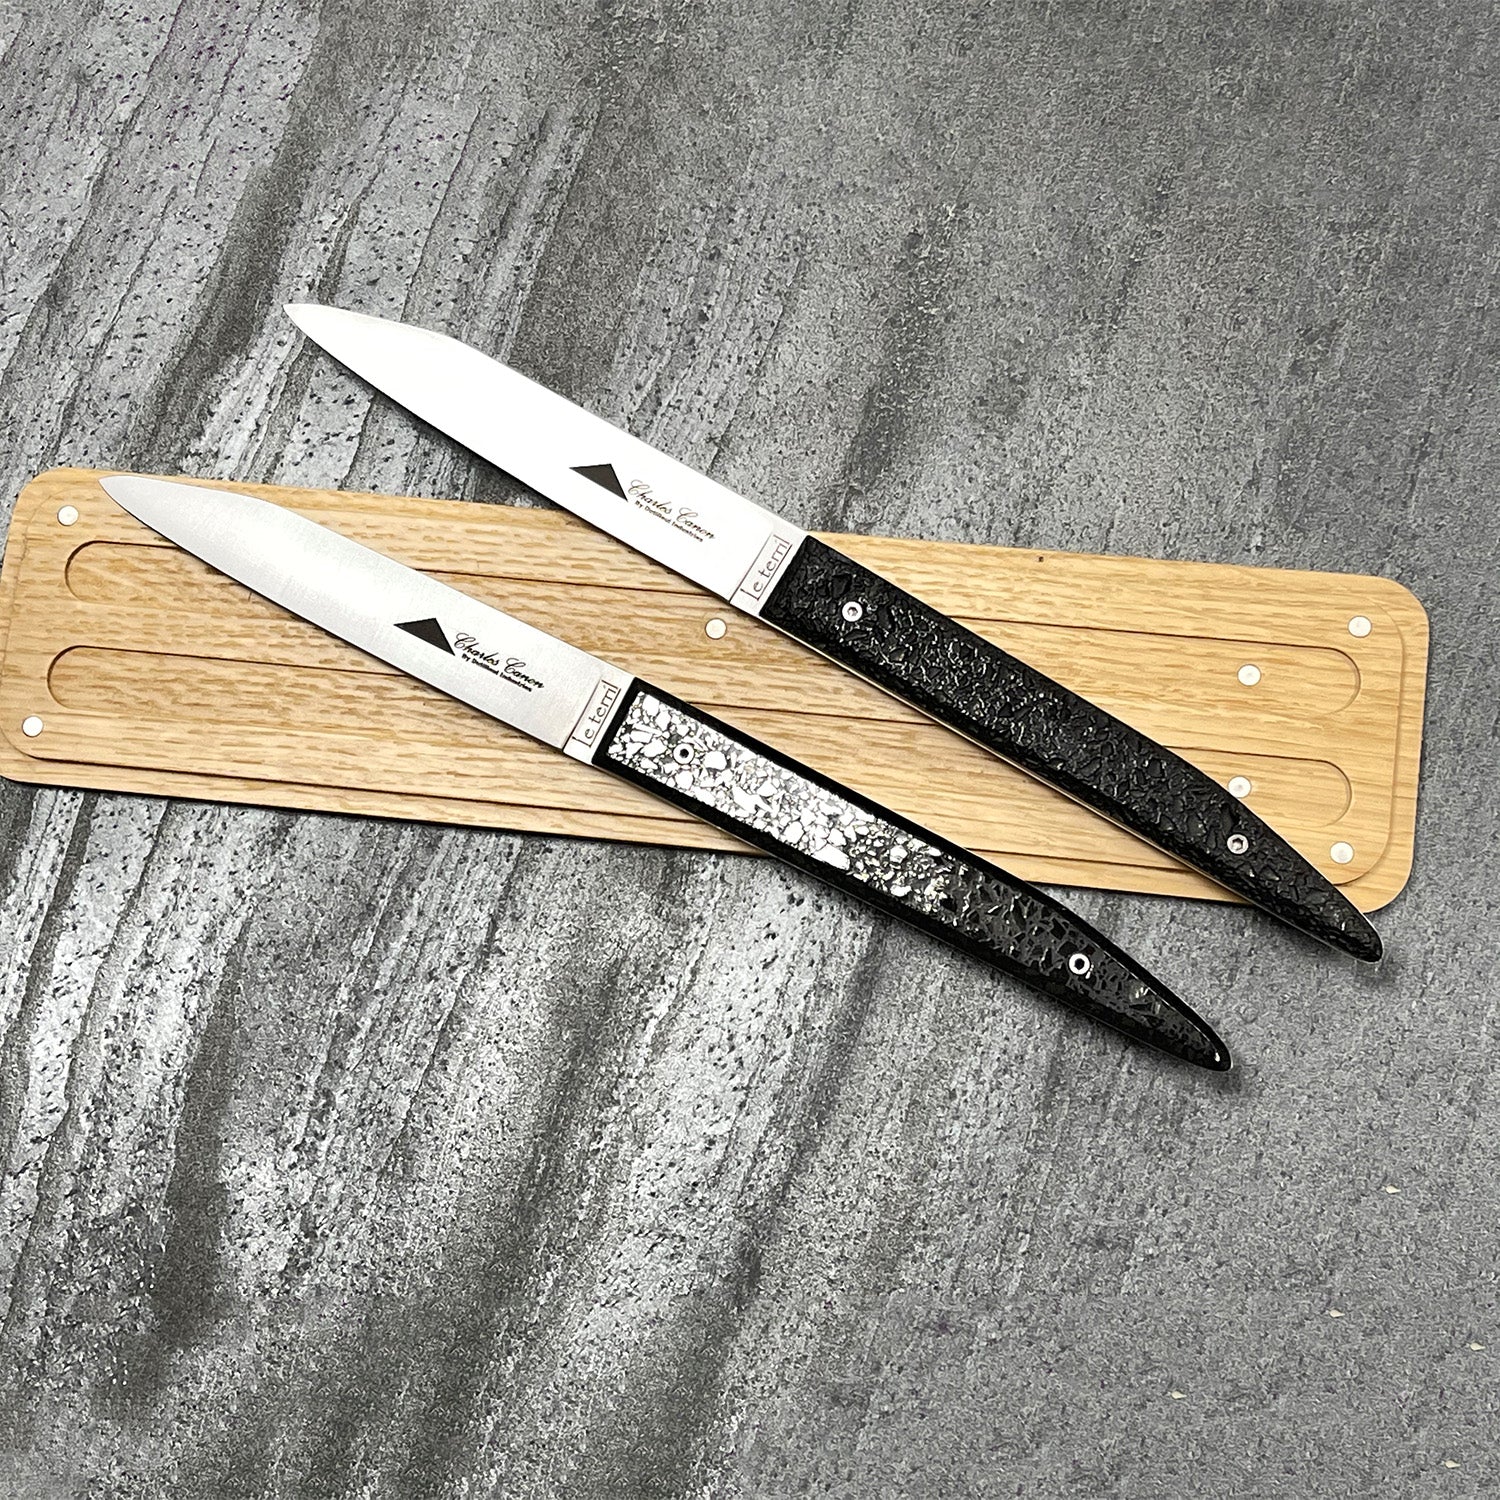 Duo box: 2 table knives with a finishing mix